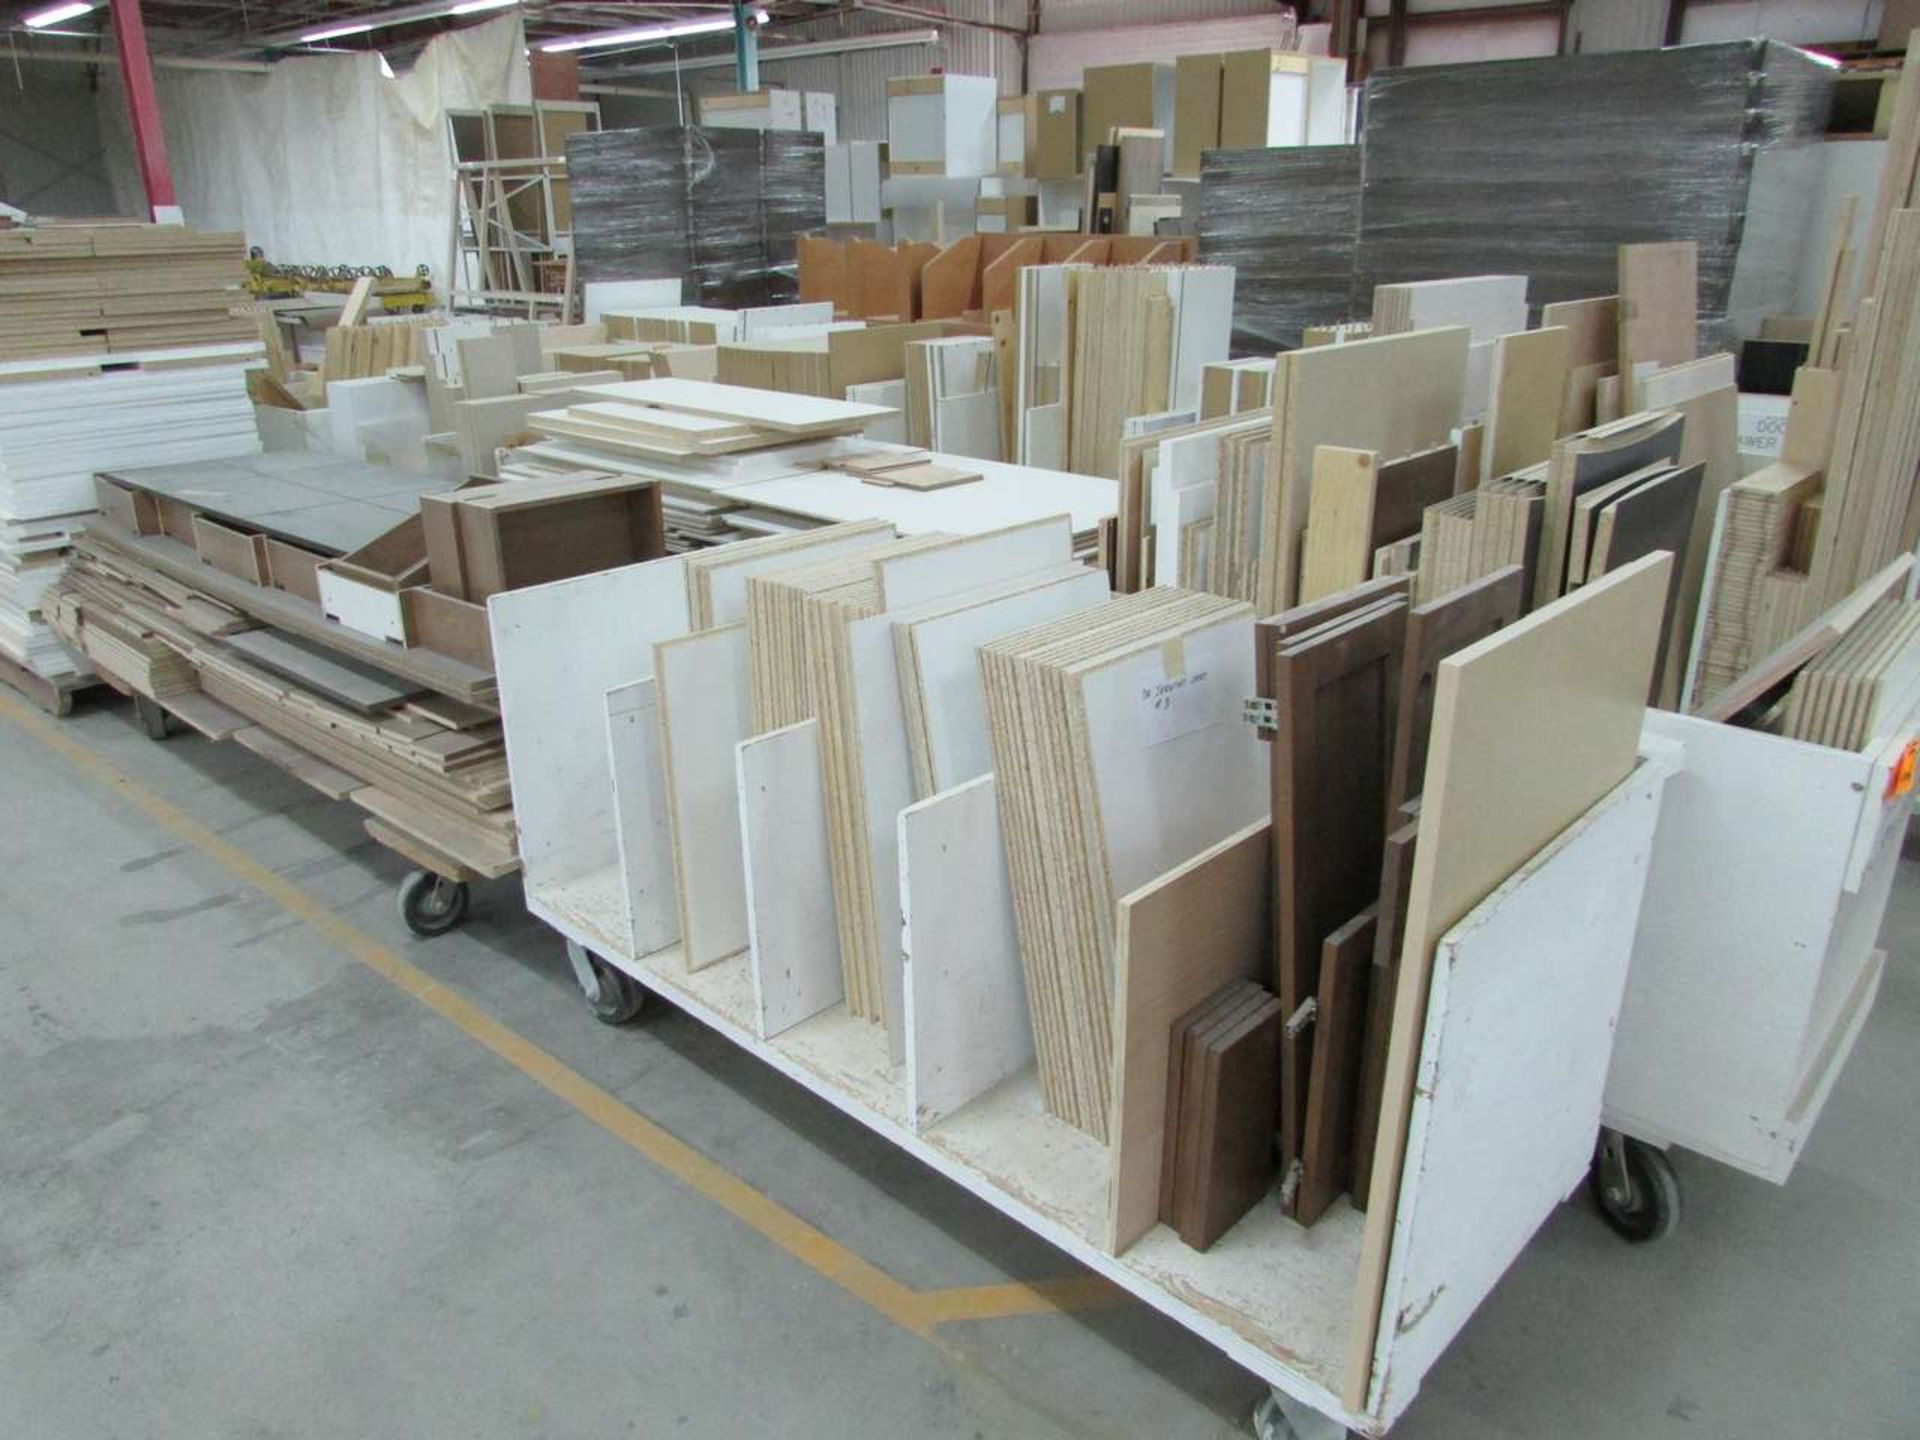 Row of Assorted Wood Panels and Supply Carts